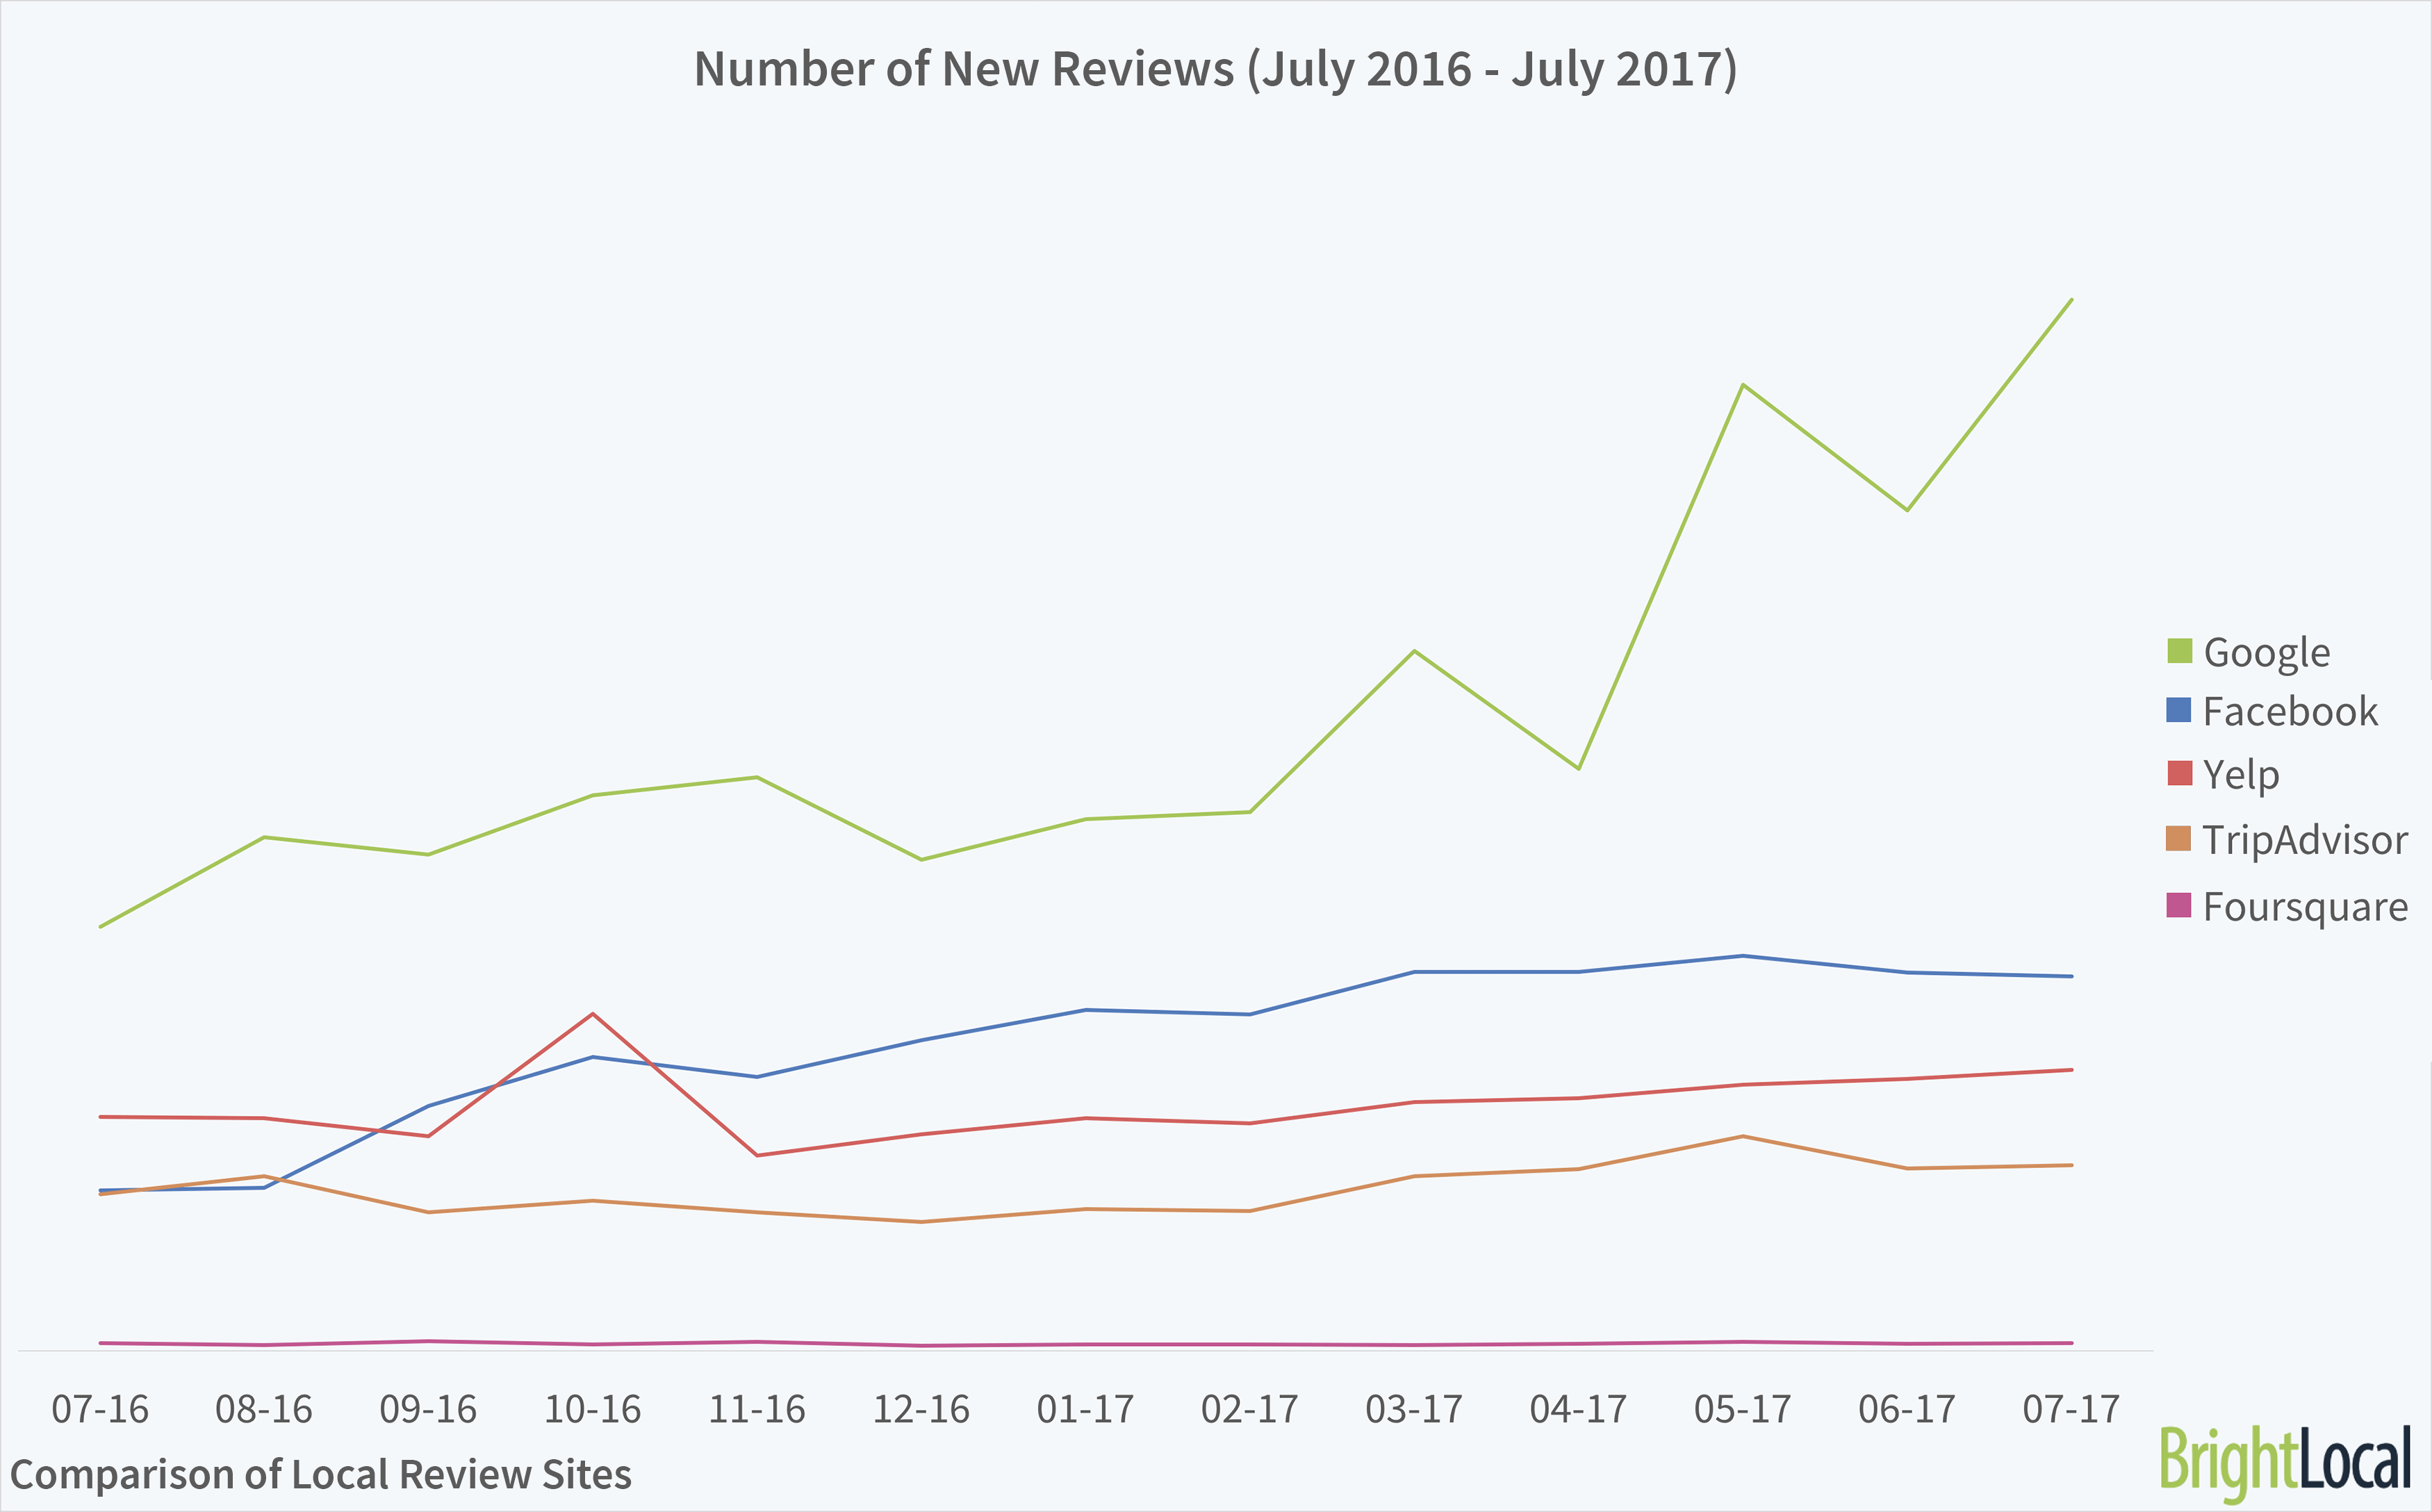 Number of New Reviews 2017